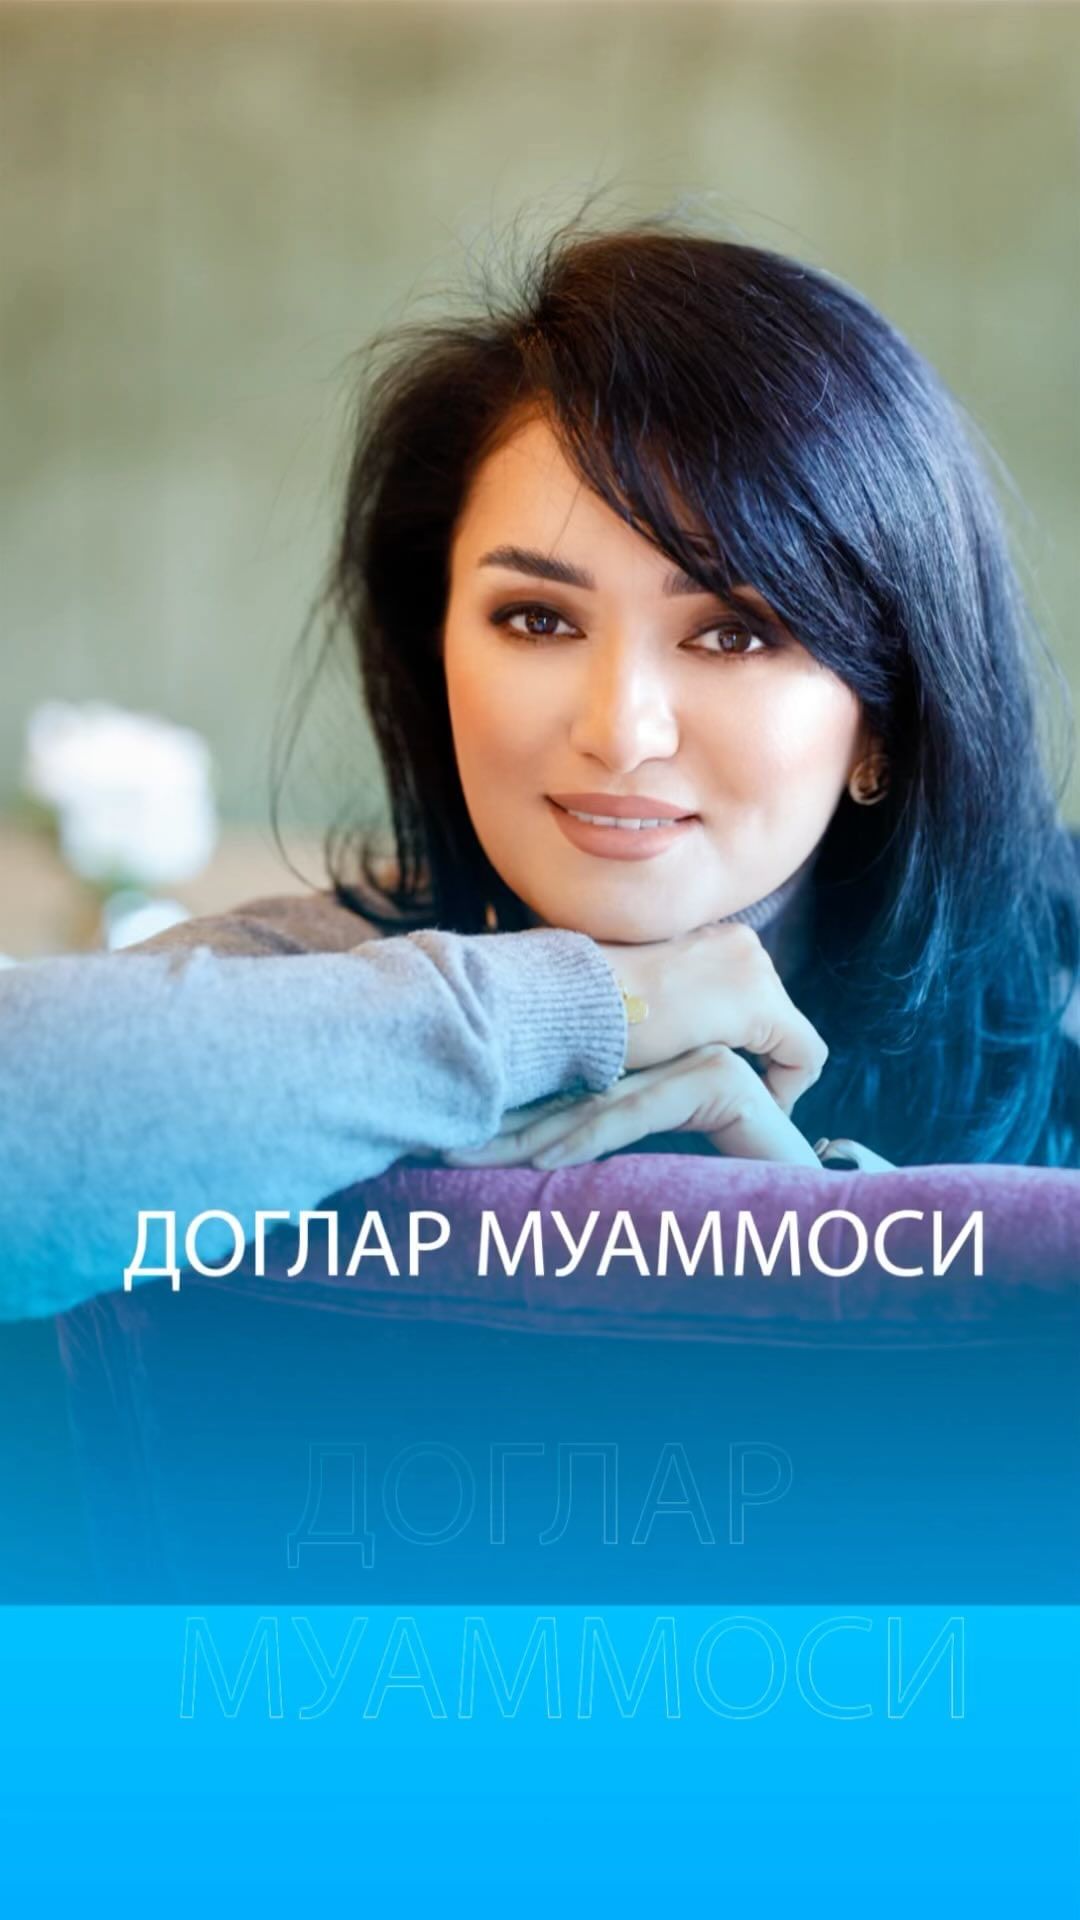 One of the top publications of @cosmetolog_nadira_yakubova which has 88 likes and 11 comments